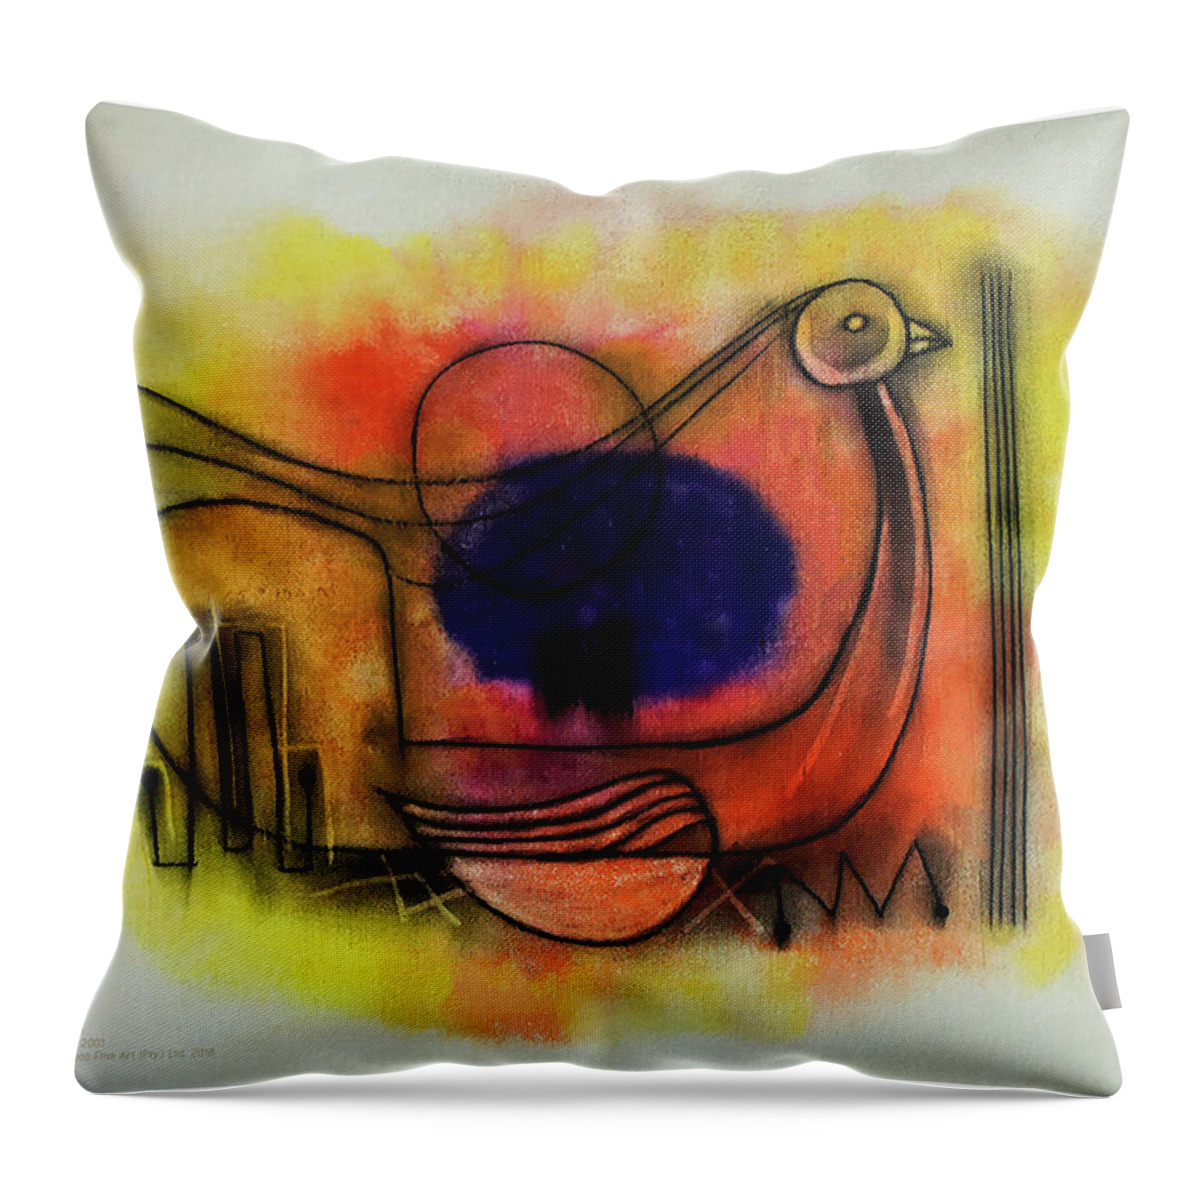 Abstract Throw Pillow featuring the painting Bird Of Spirit by Winston Saoli 1950-1995